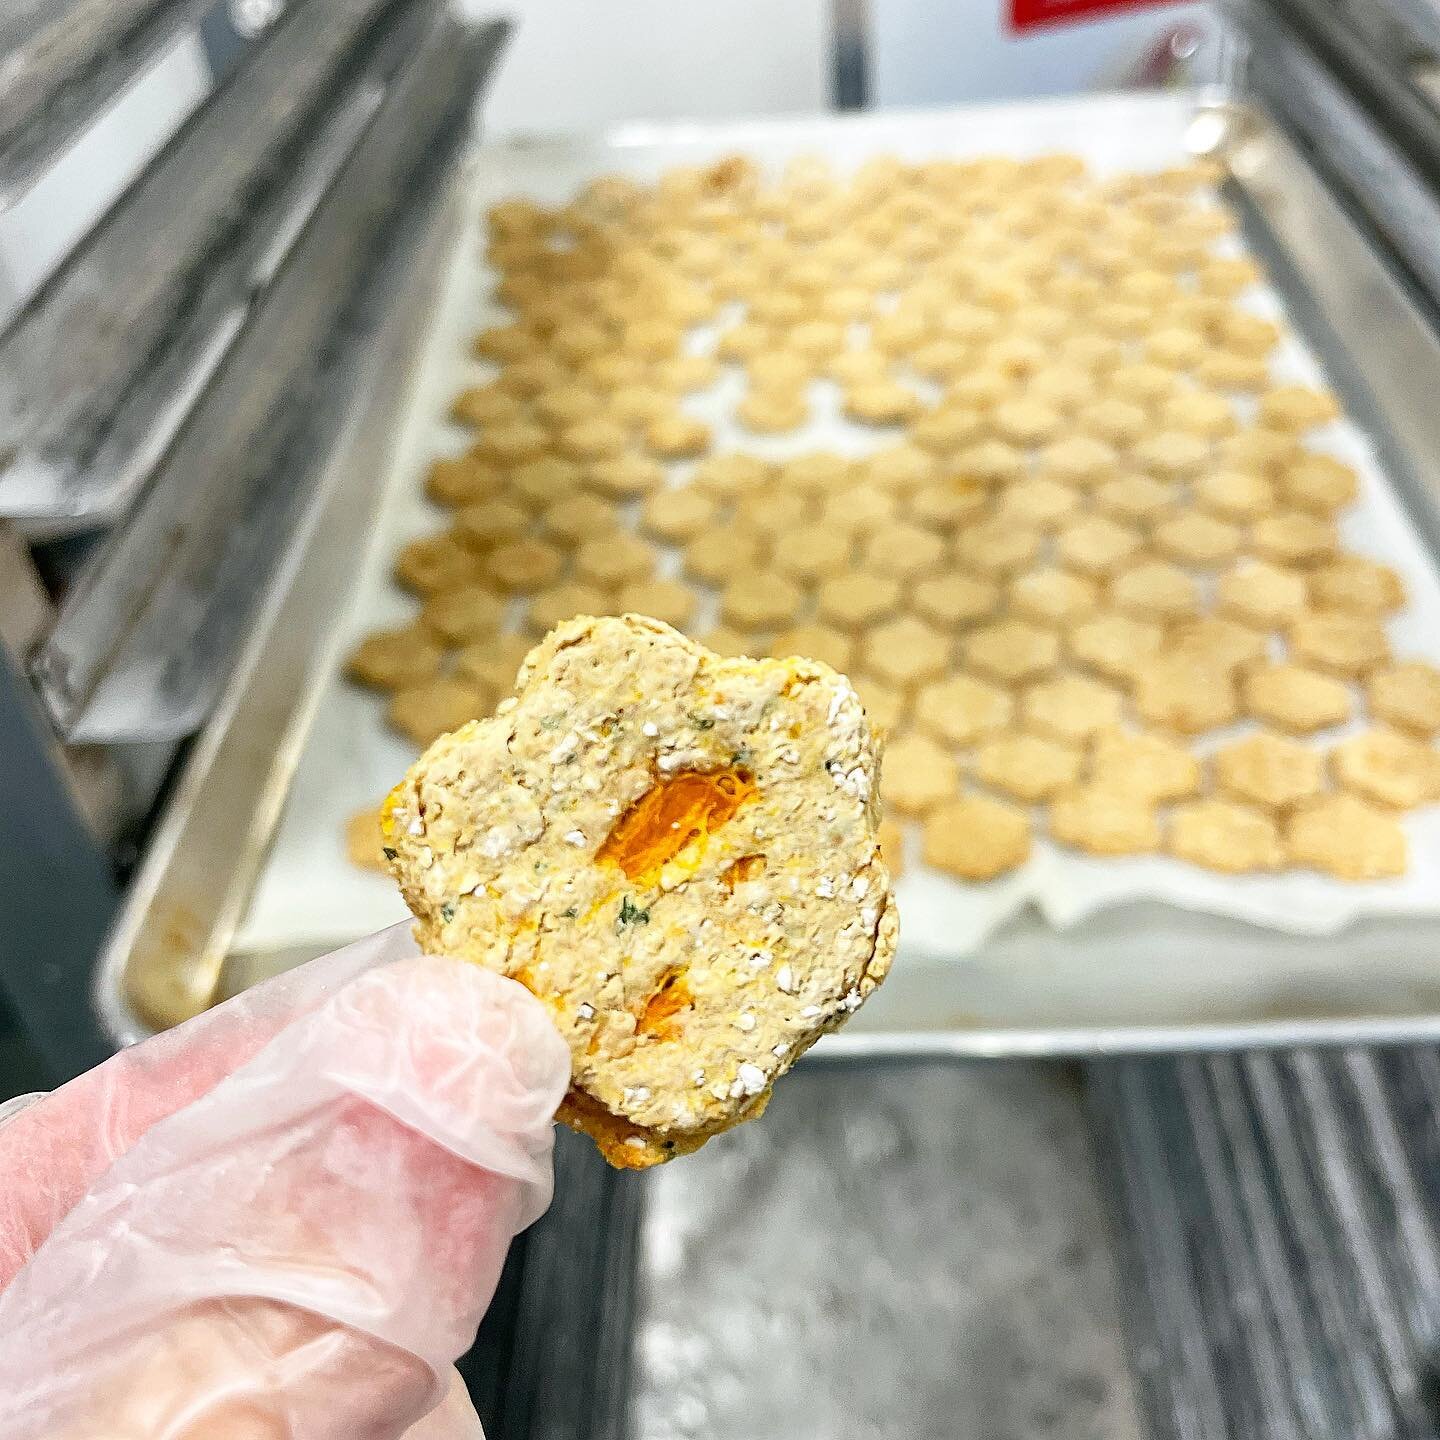 Have you tried our Meat &amp; Potatoes yet?! Our favorite is finding the perfect sweet-potatoey bite, like this one 🤩🥩🍠
.
.
.
.
.
.
.
.
#Buppypets #behindthescenes #bts #kitchenlife #bakerslife #production #makefoodyourbusiness #pettreats #goodfoo